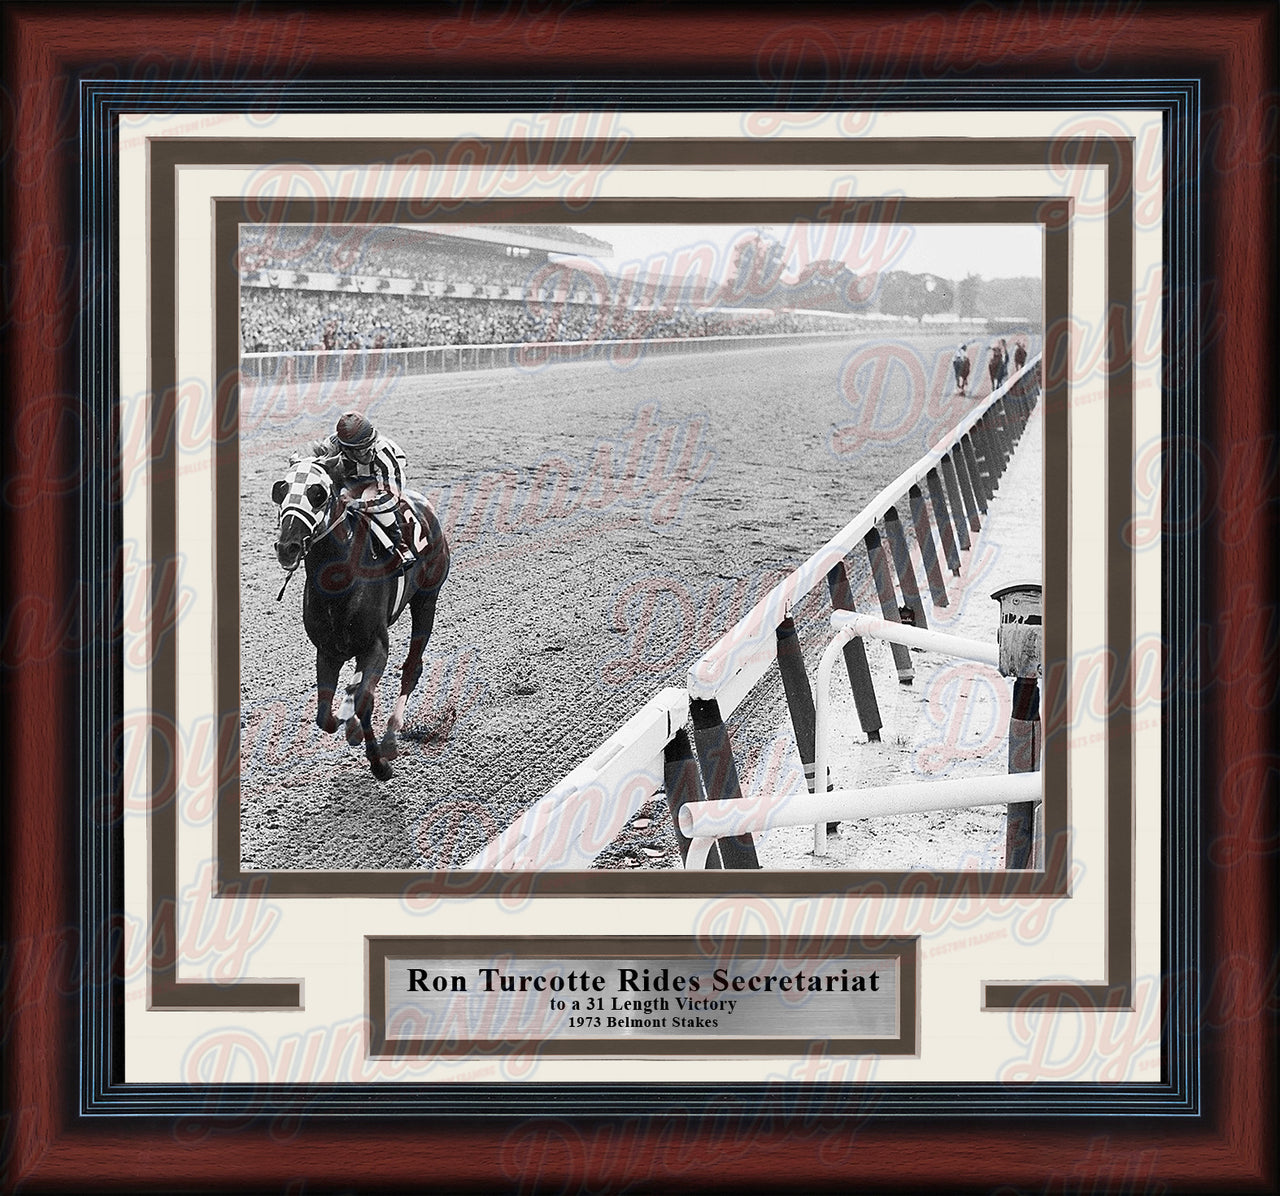 Ron Turcotte Riding Secretariat at the 1973 Belmont Stakes Framed Horse Racing Photo - Dynasty Sports & Framing 